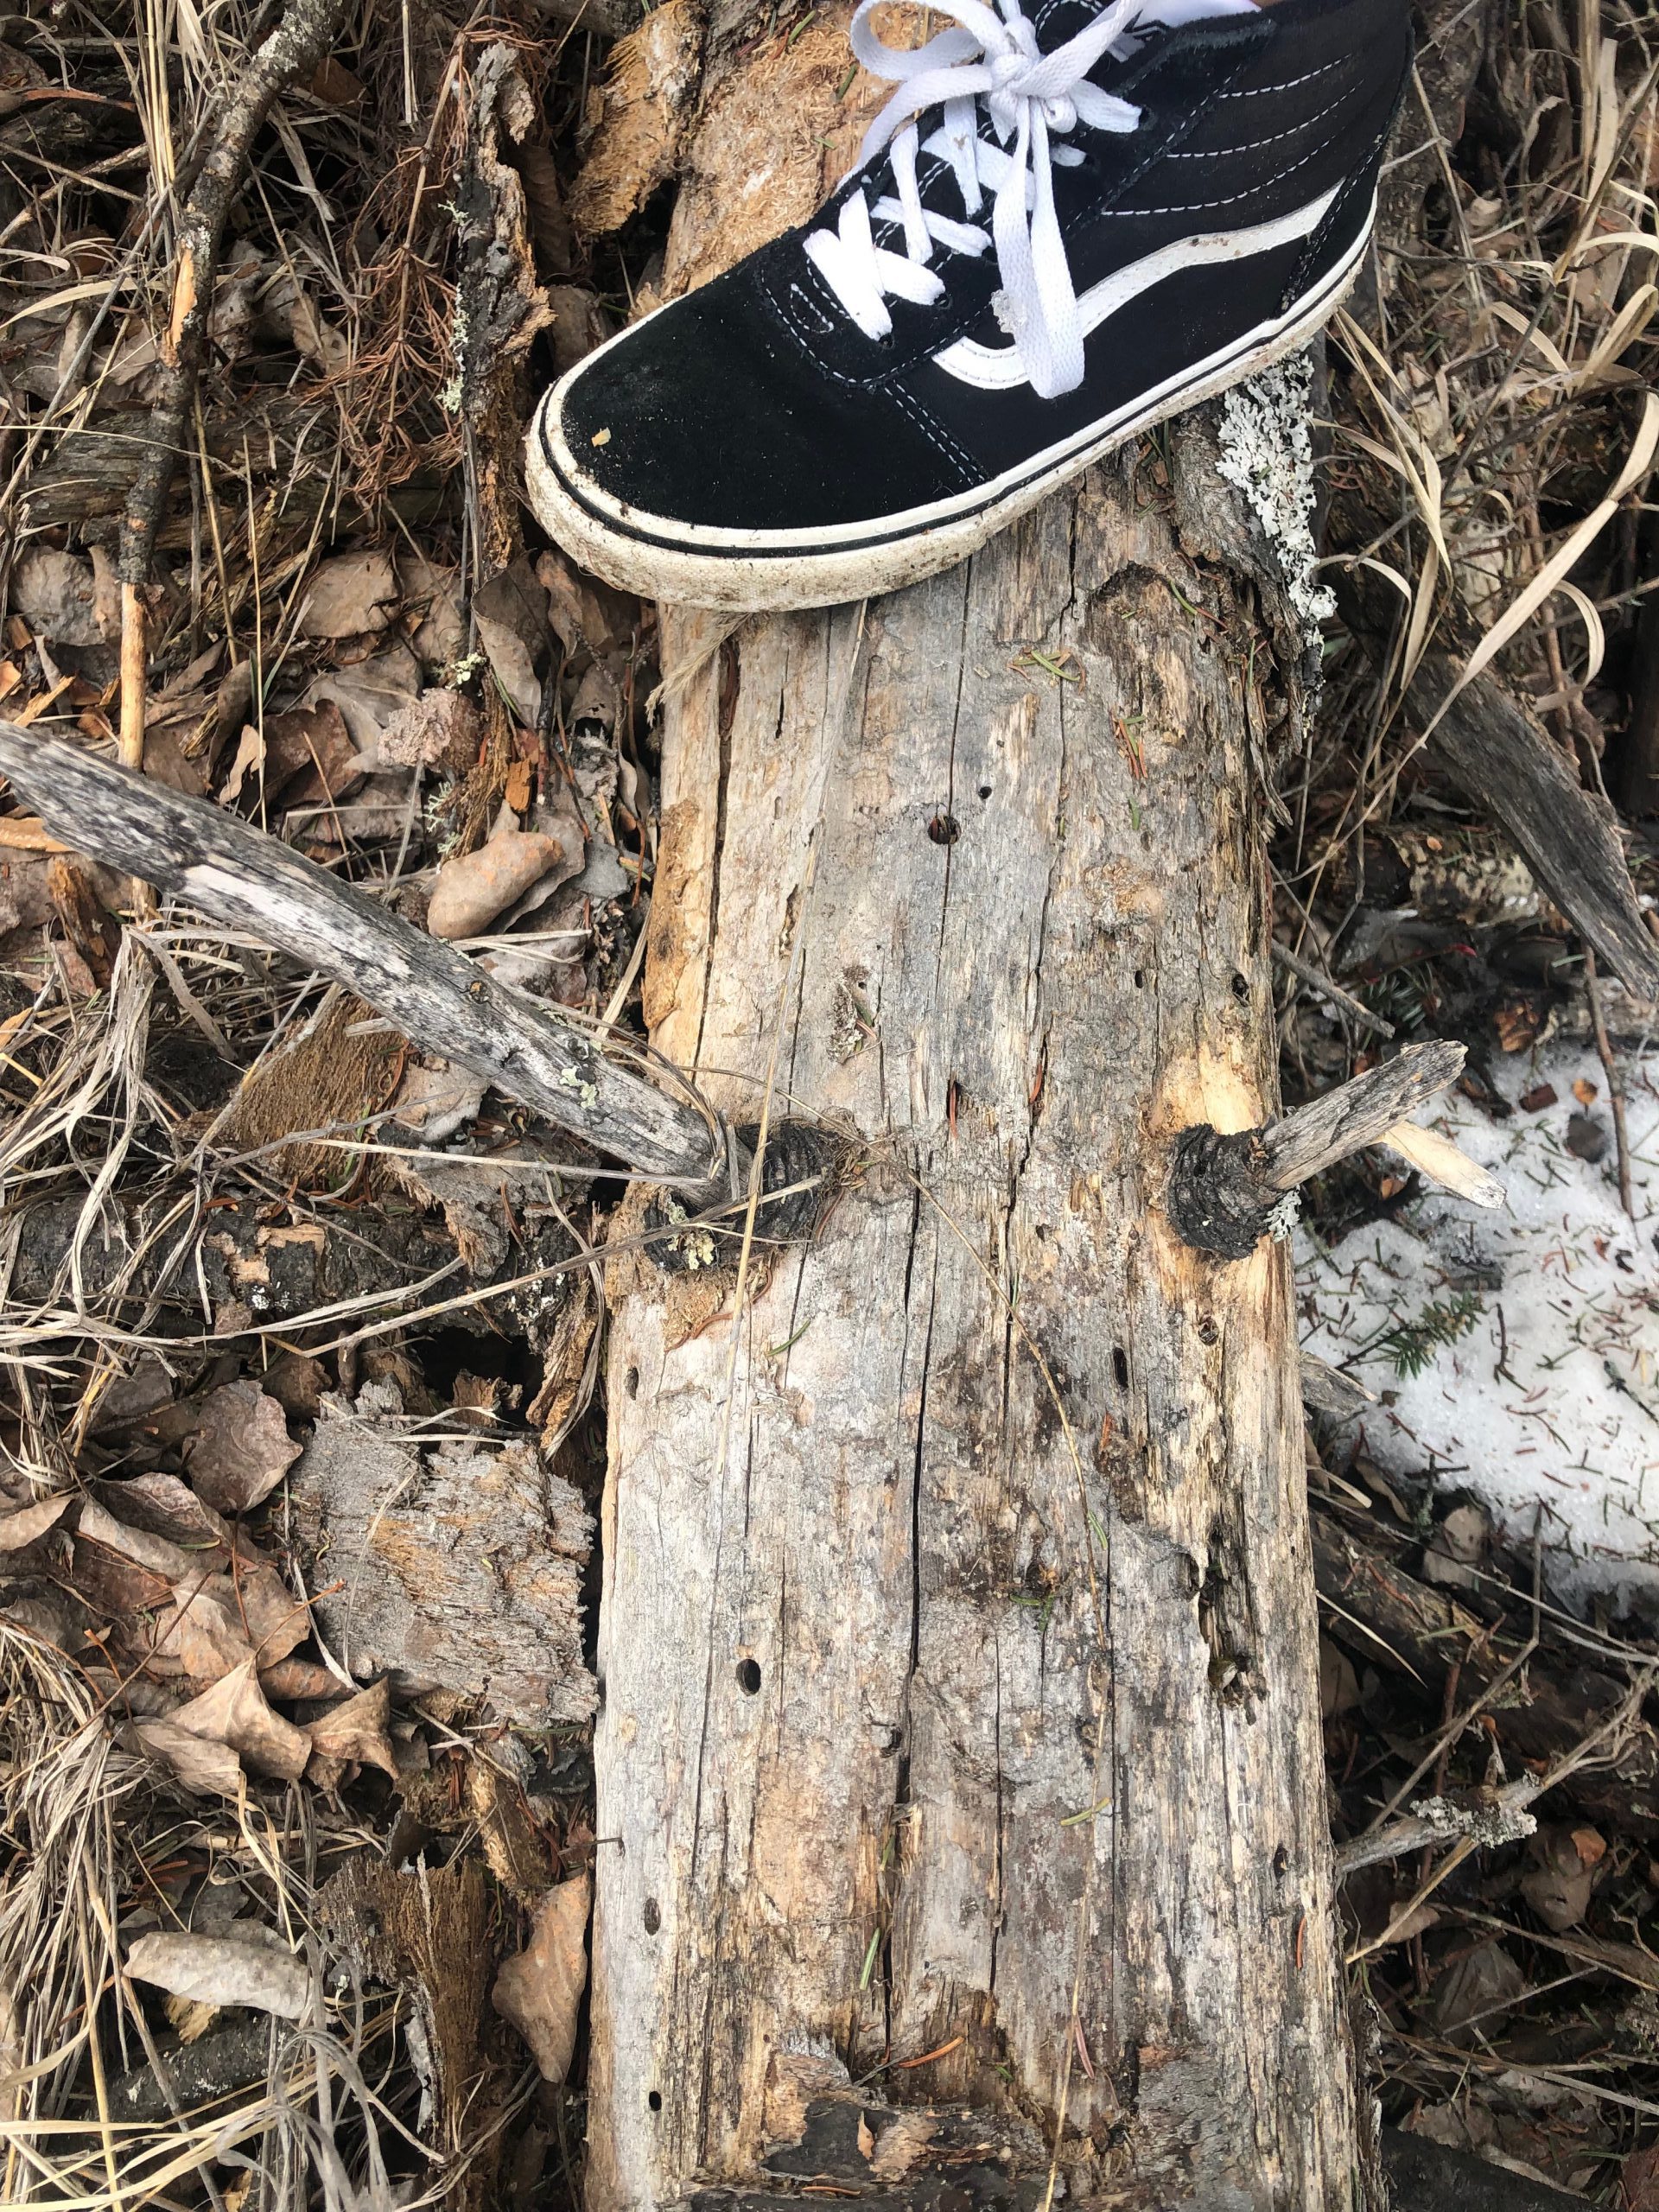 A picture of a log on the forest ground with a black and white sneaker stepping on it.